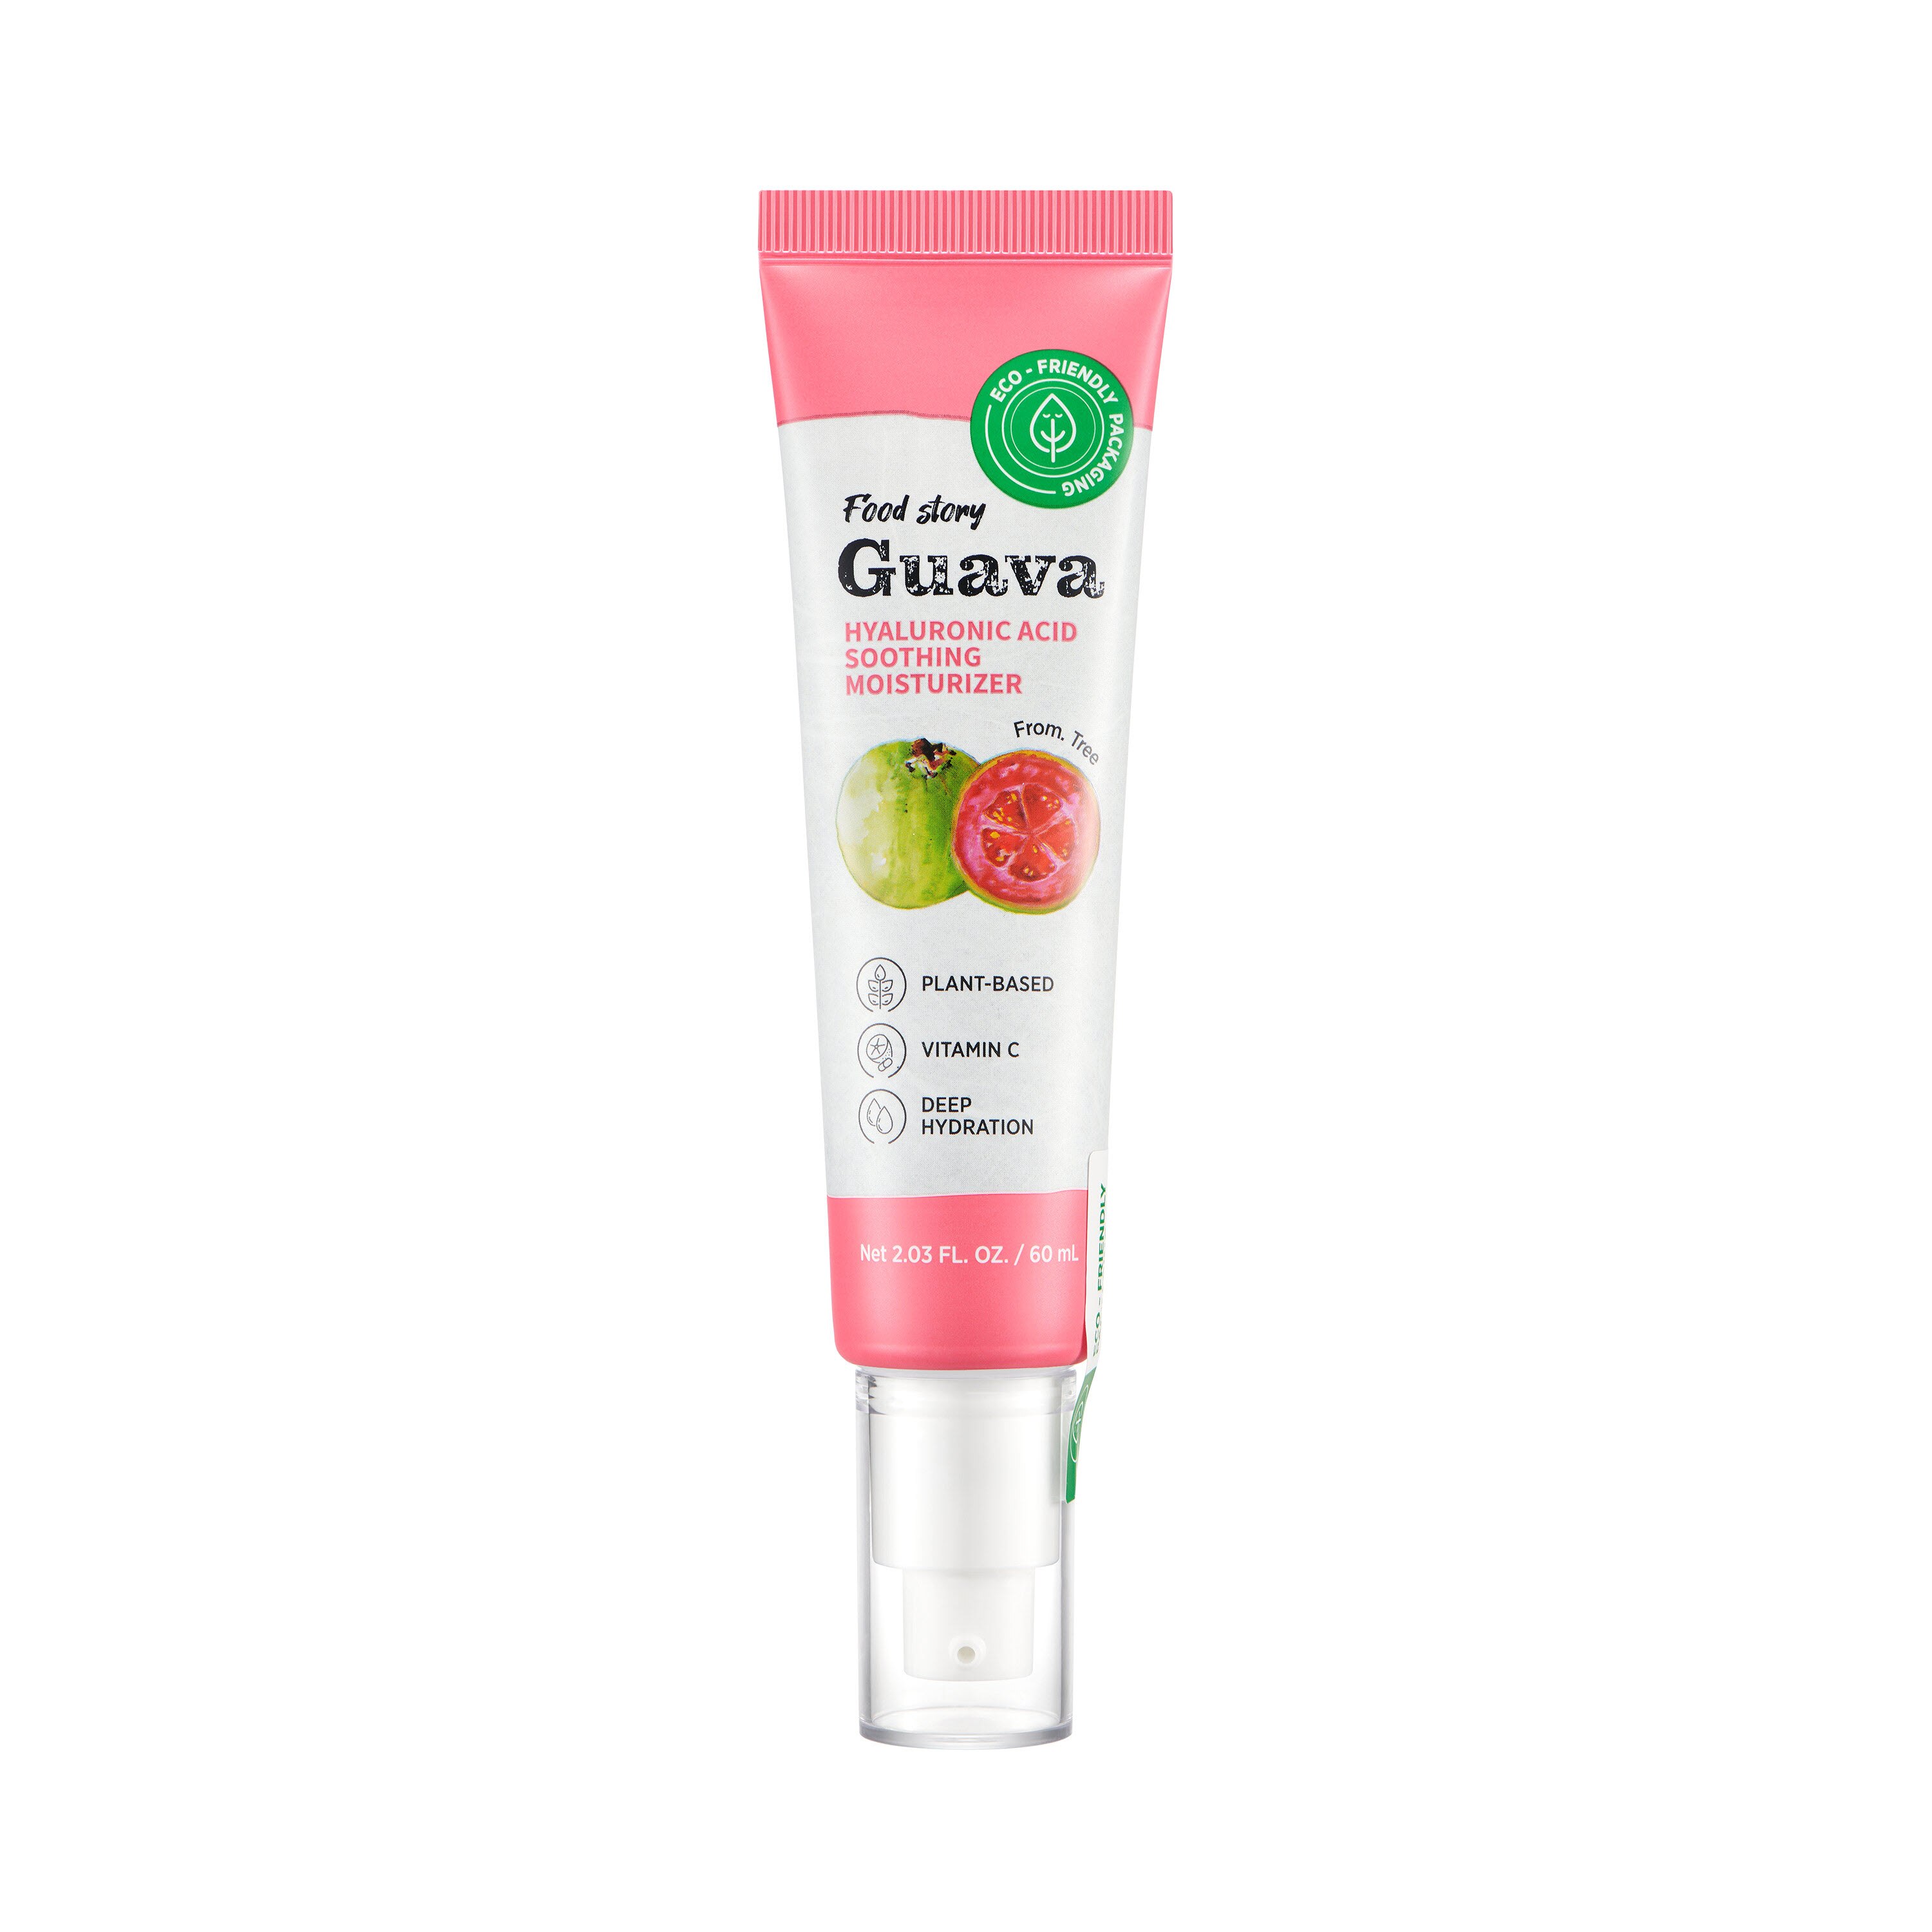 Food Story for Skin Guava Hyaluronic Acid Soothing Moisturizer, 2.03 OZ